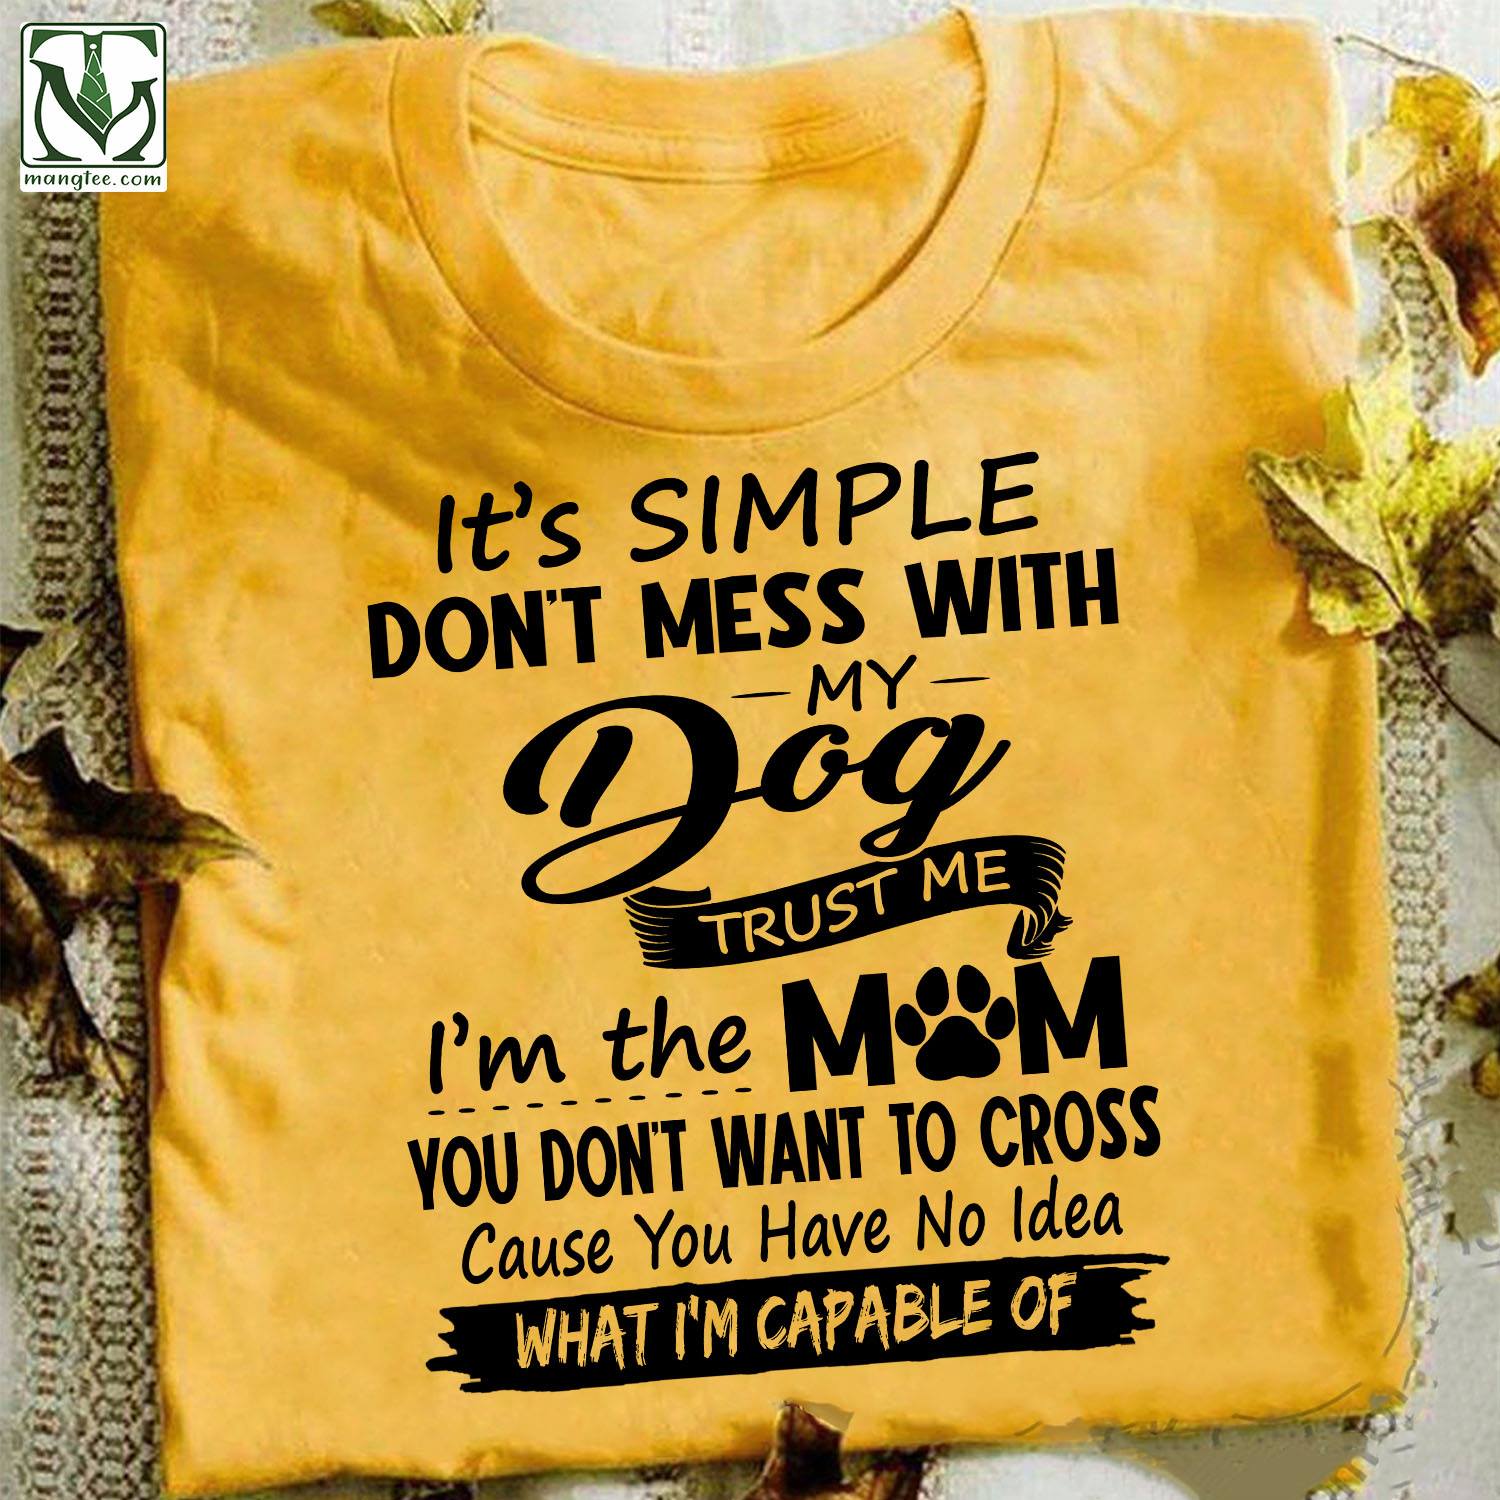 It’s simple don’t mess with my dog trust me I’m the mom you don’t want to cross – Dog footprint